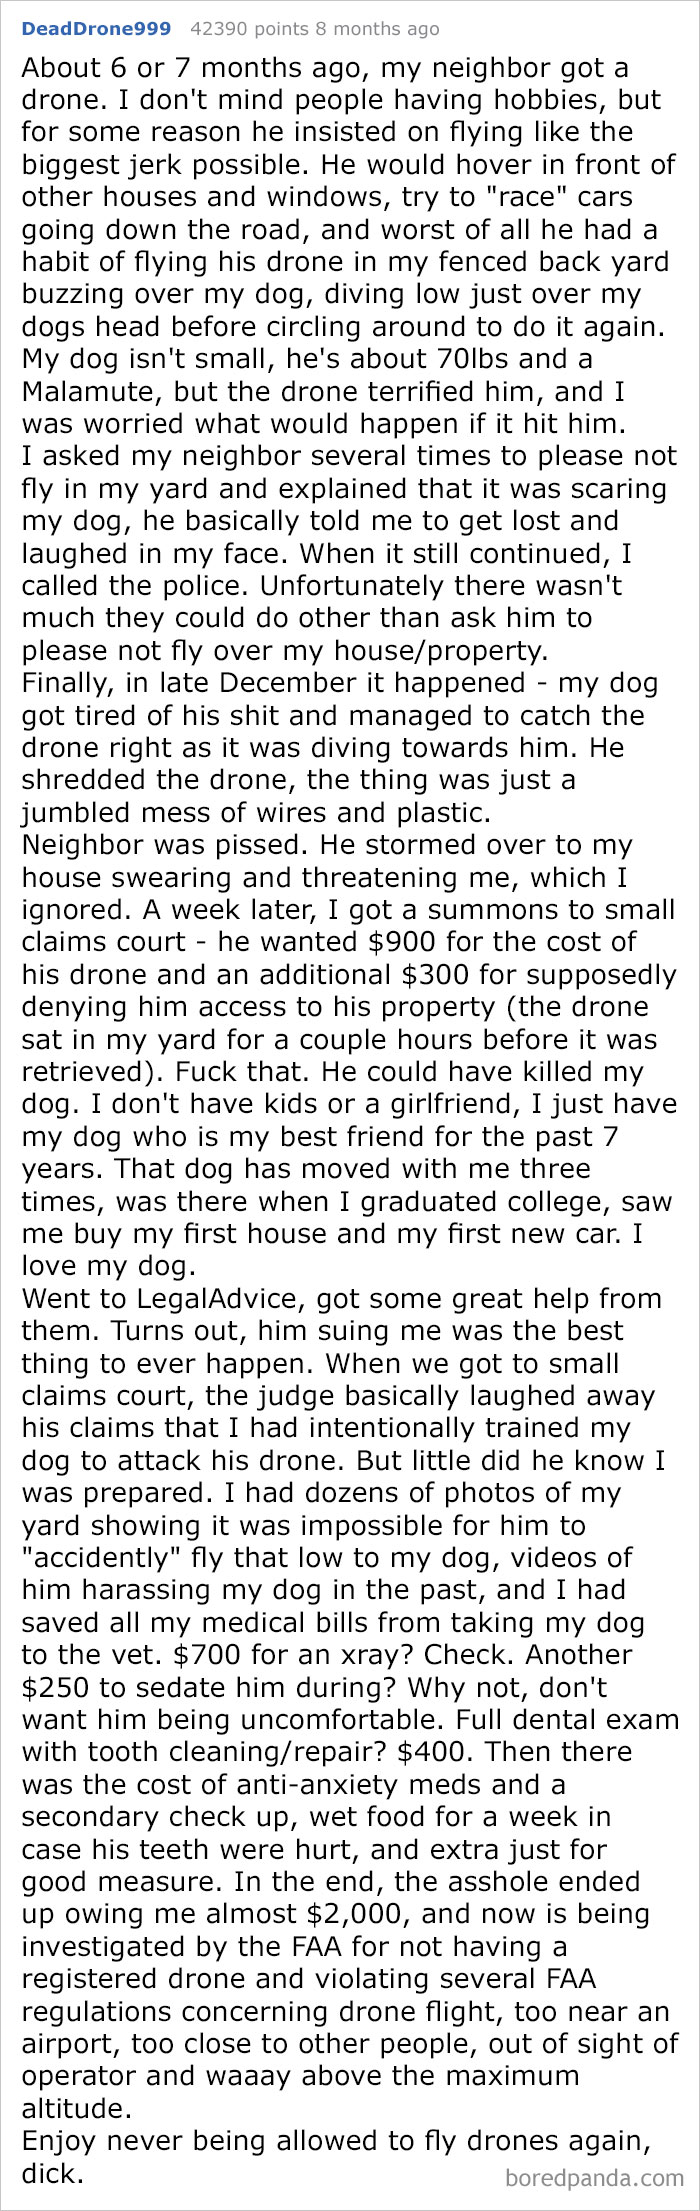 Neighbor Sued Me After Harassing My Dog For Months, Lost Horribly